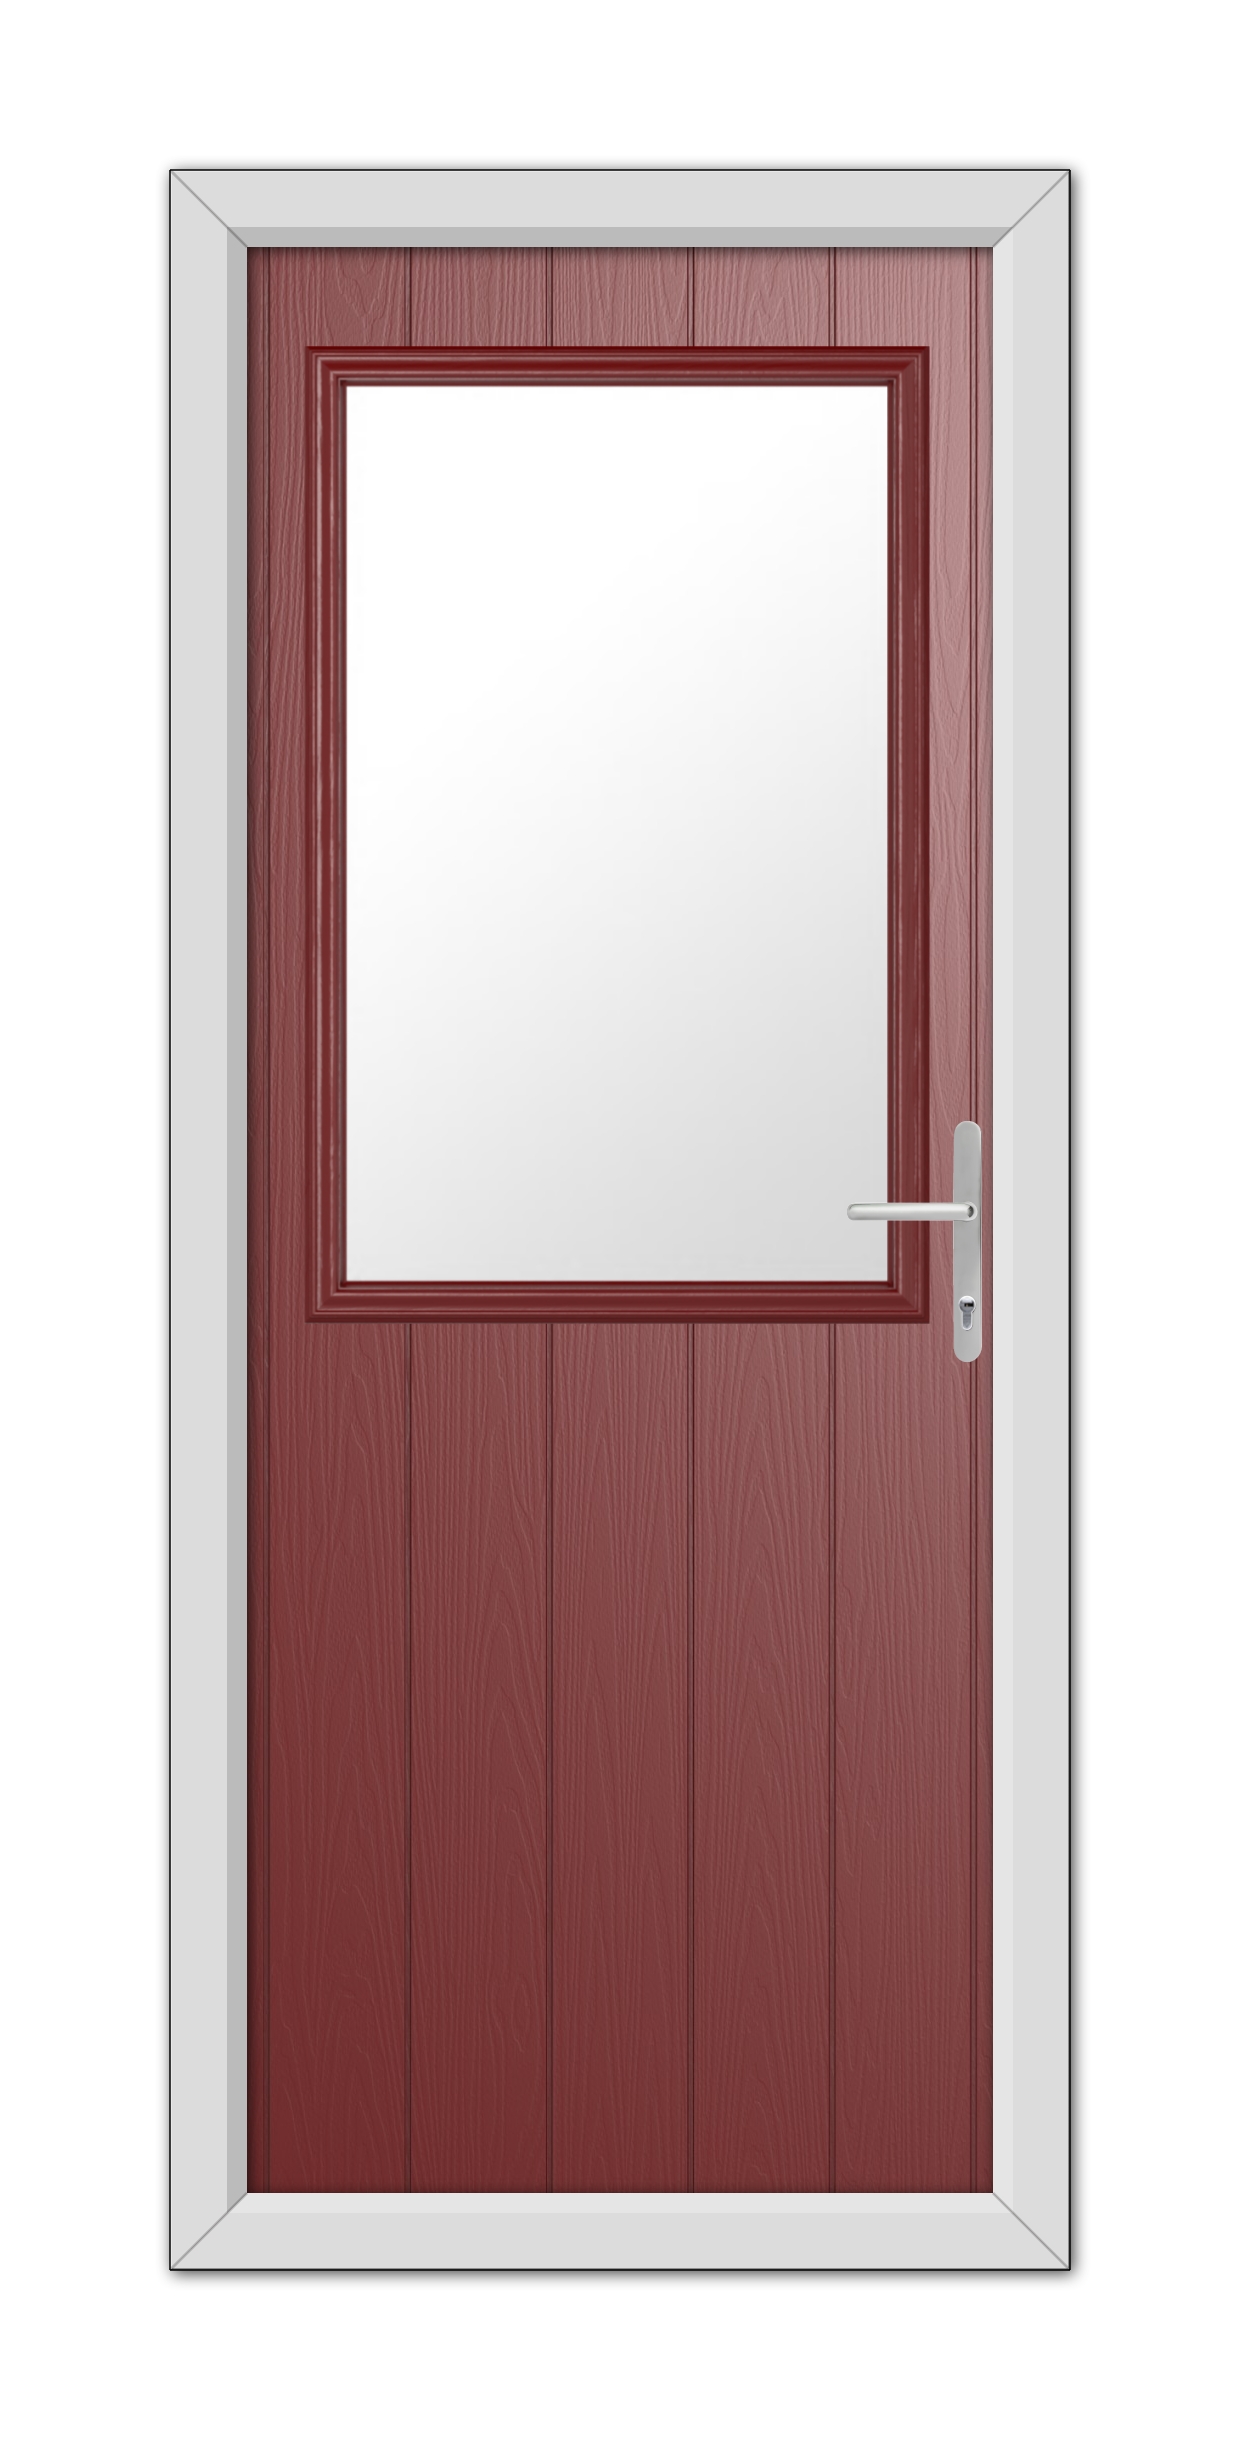 A Red Clifton Composite Door 48mm Timber Core with a white frame, featuring a square window and a handle on the right side.